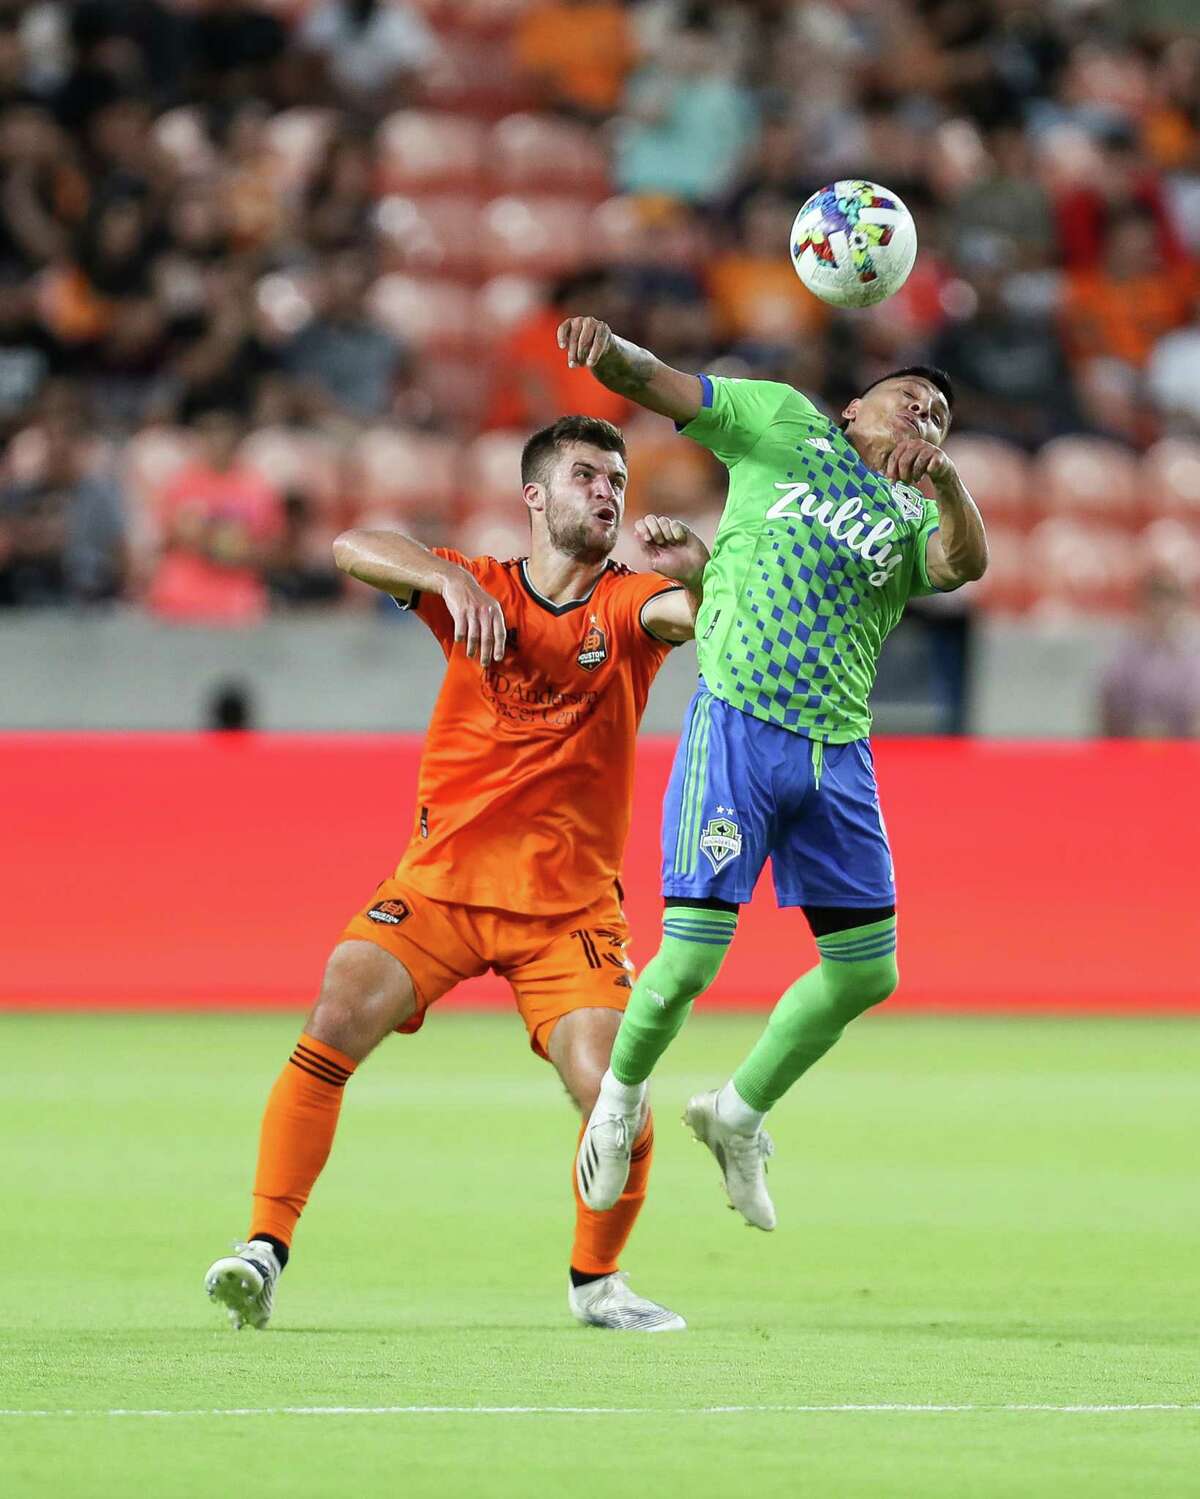 Seattle Sounders forward Raúl Ruidíaz (9) uses his shulder to control the ball against Houston Dynamo FC defender Ethan Bartlow (13) during the first half of an MLS match at PNC Stadium on Wednesday, May 18, 2022, in Houston.